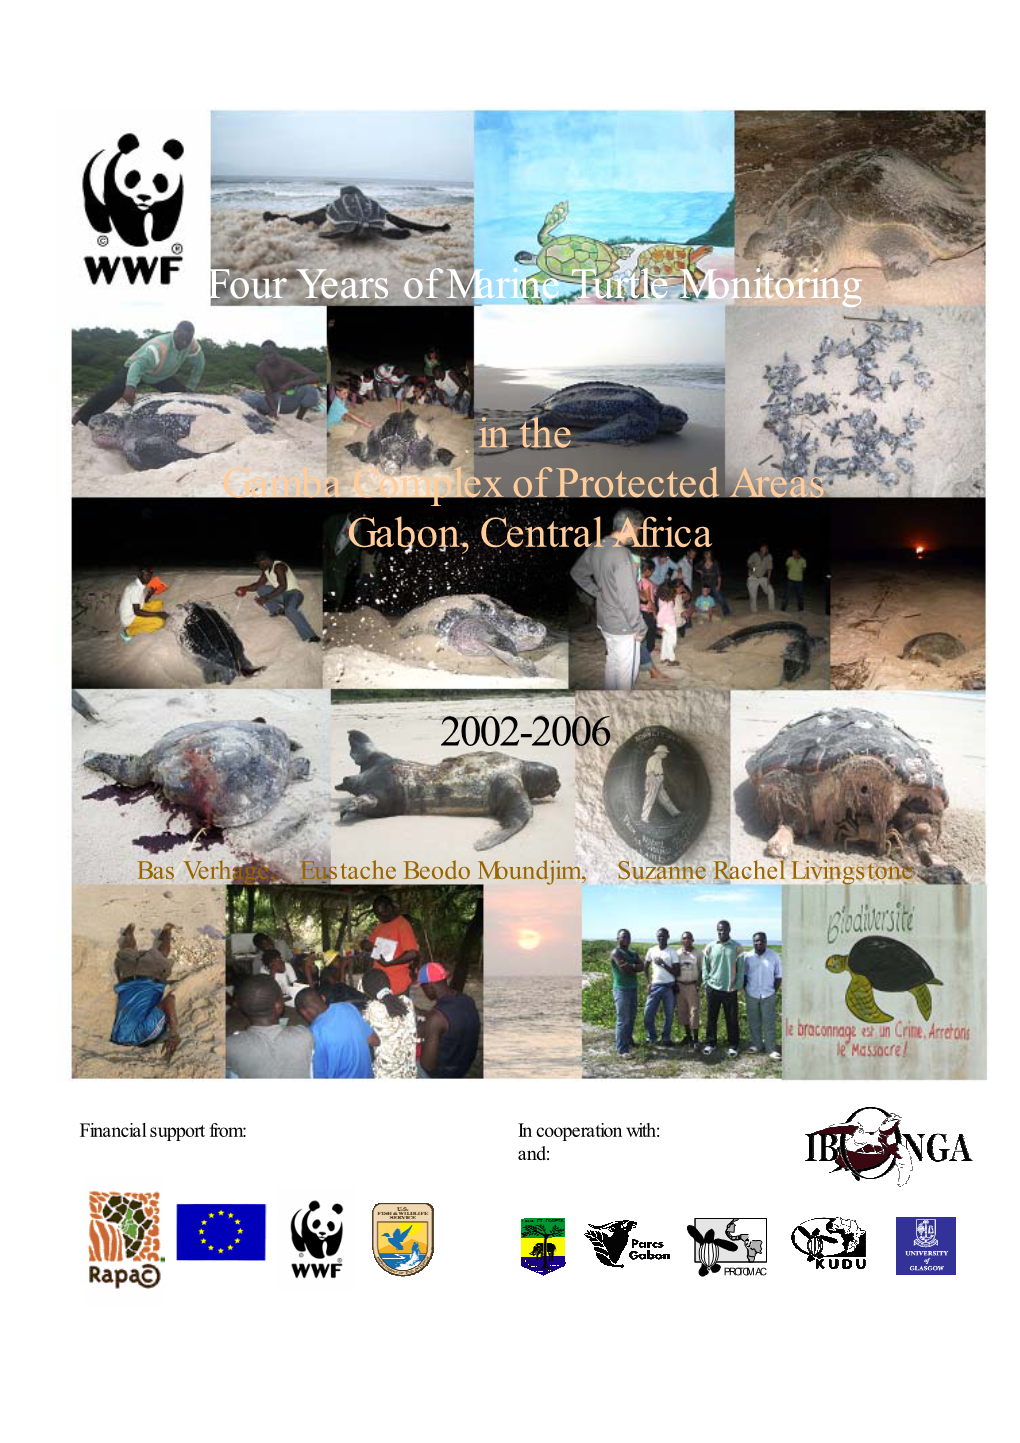 Four Years of Marine Turtle Monitoring in the Gamba Complex Of